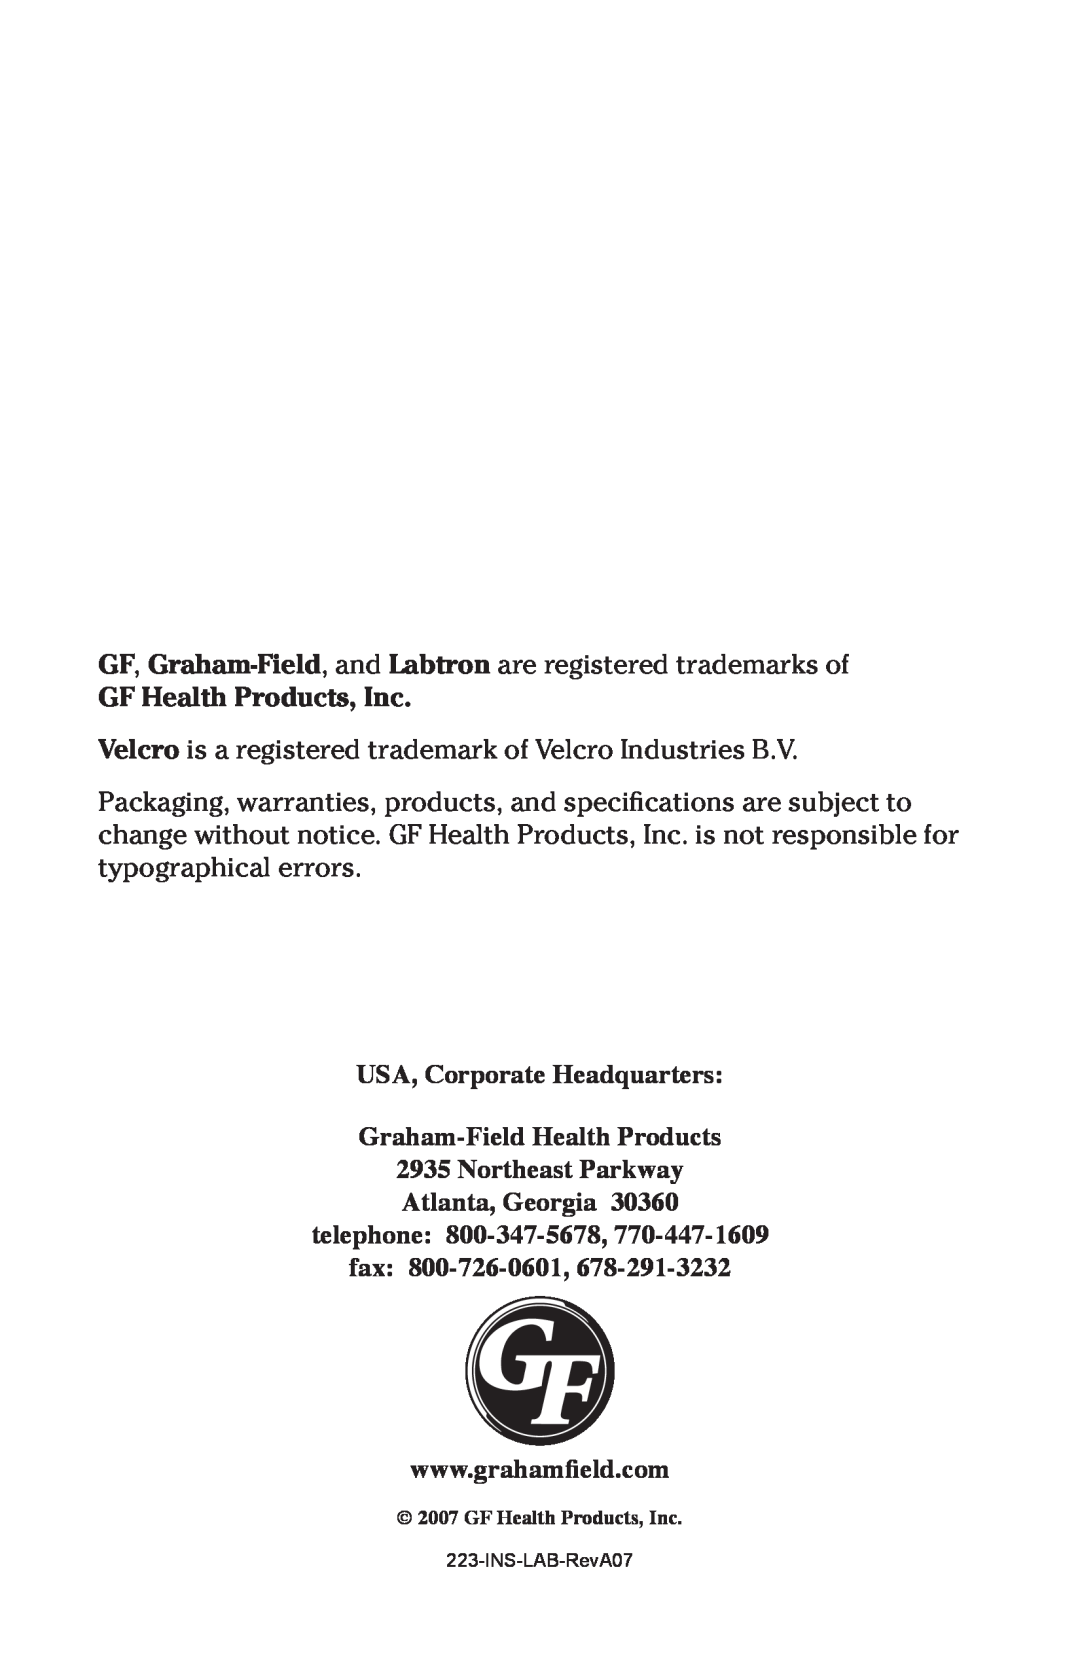 Graham Field V223, 223B user manual GF Health Products, Inc, USA, Corporate Headquarters Graham-Field Health Products, fax 